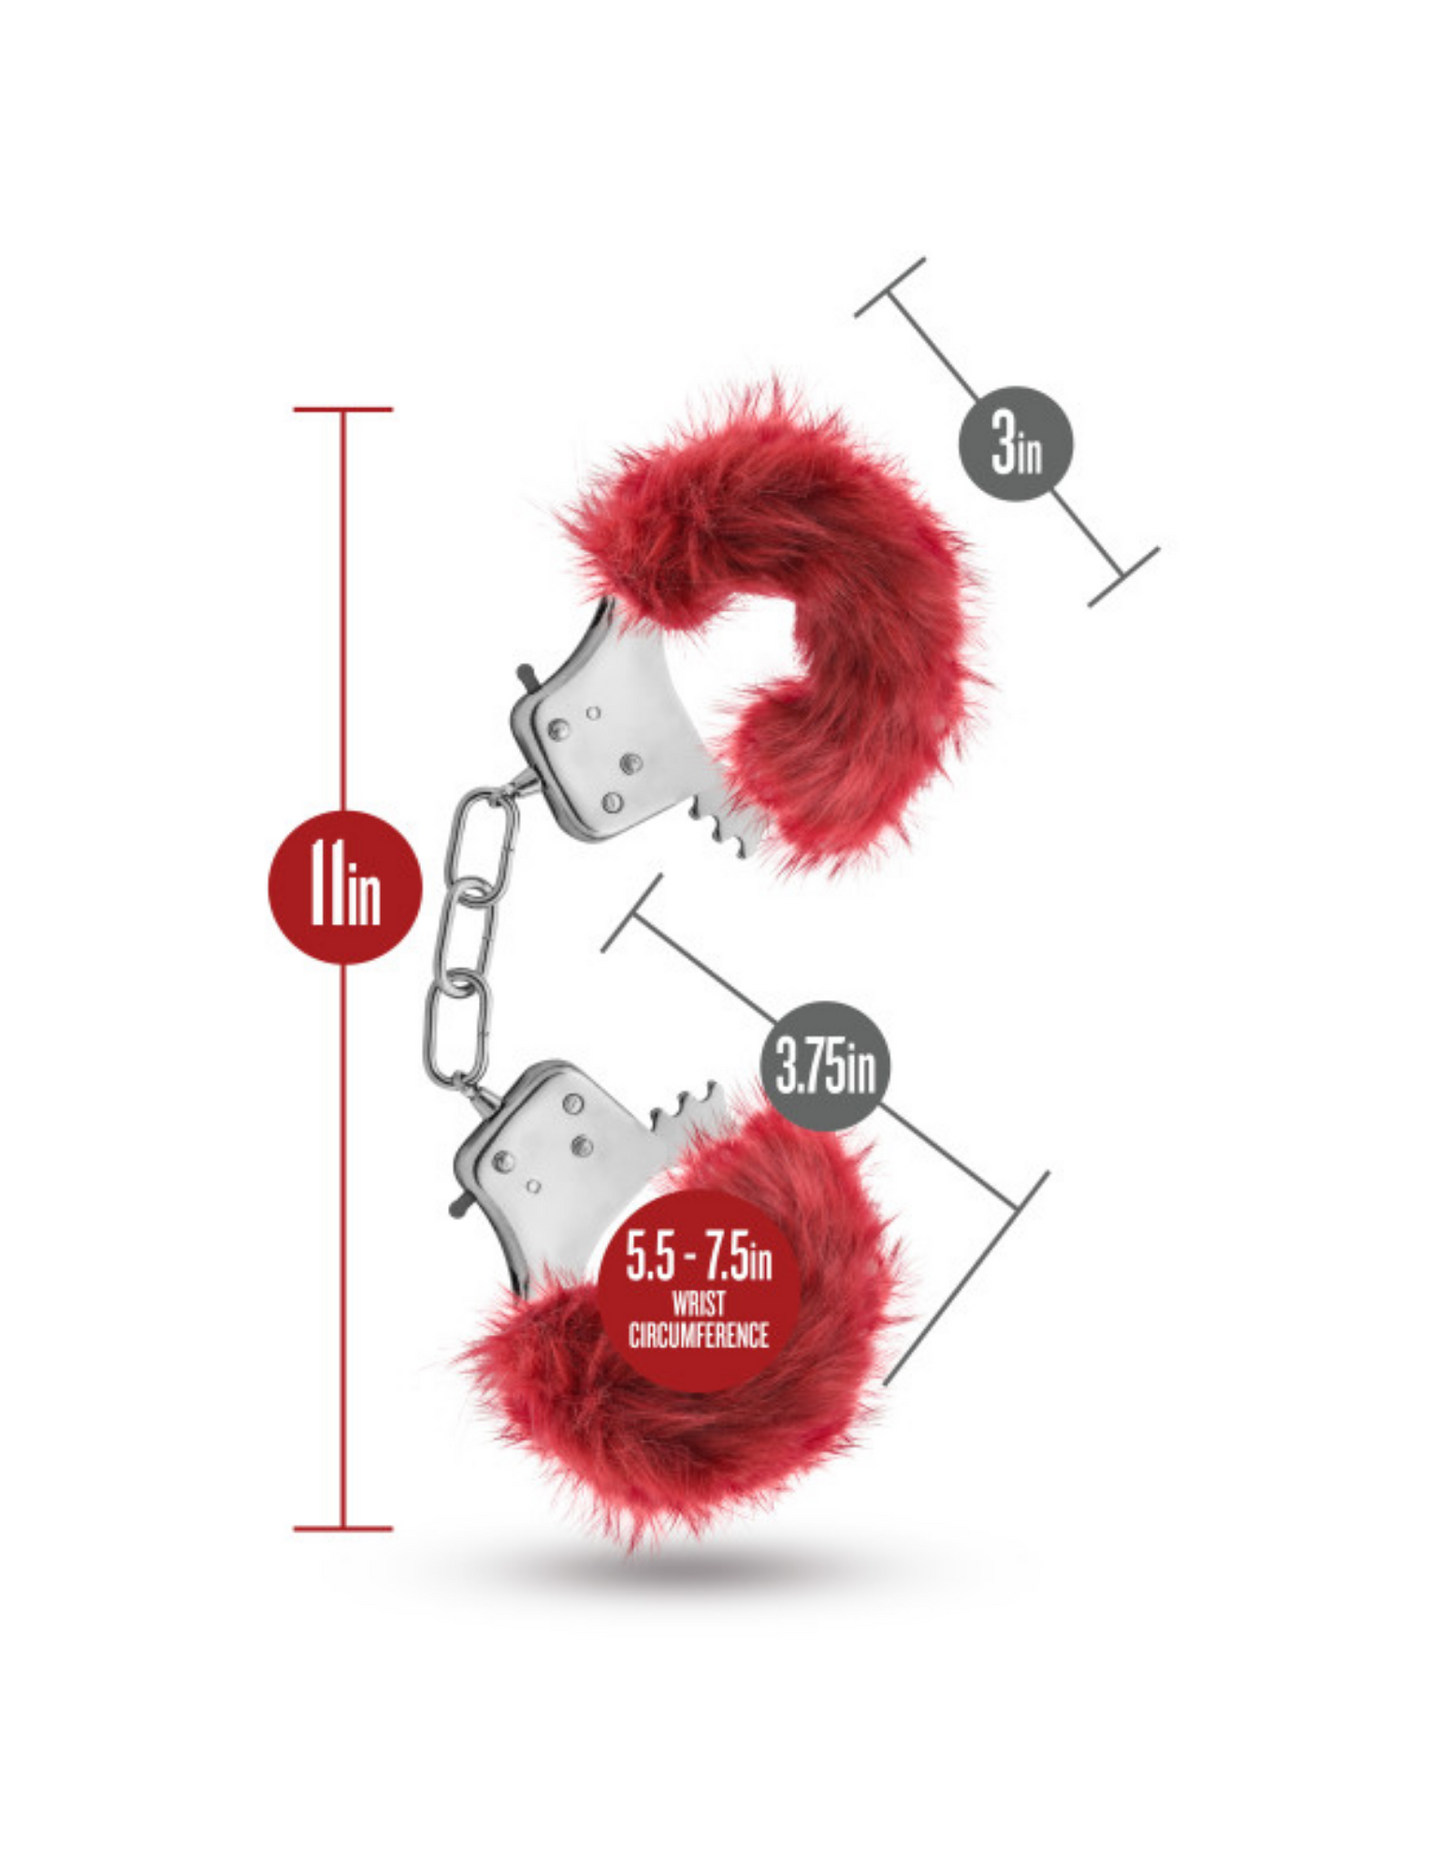 Image shows the dimensions of the furry cuffs: 11in L, 3.75 per cuff, 5.5-8in adjustable cuffs, 3in resting circumference